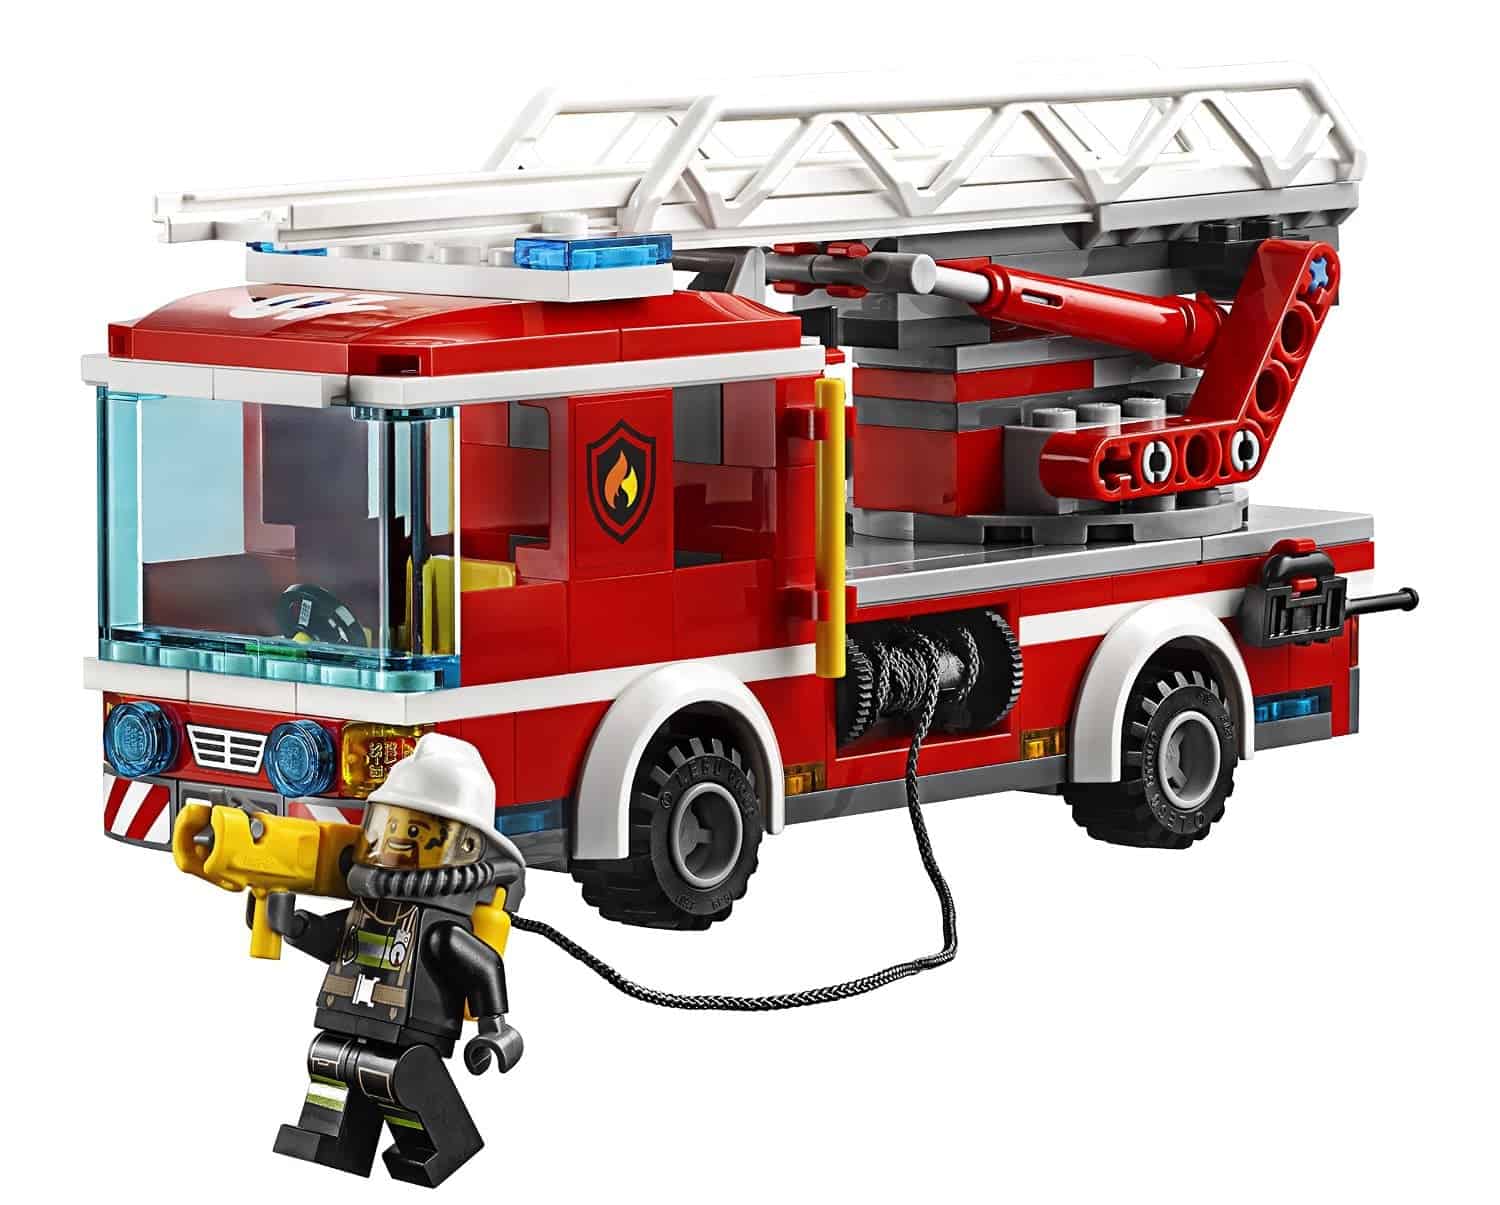 Lego Gift Ideas by Age - Toddler to Twelve Years: Fire Ladder Truck | www.thepinningmama.com